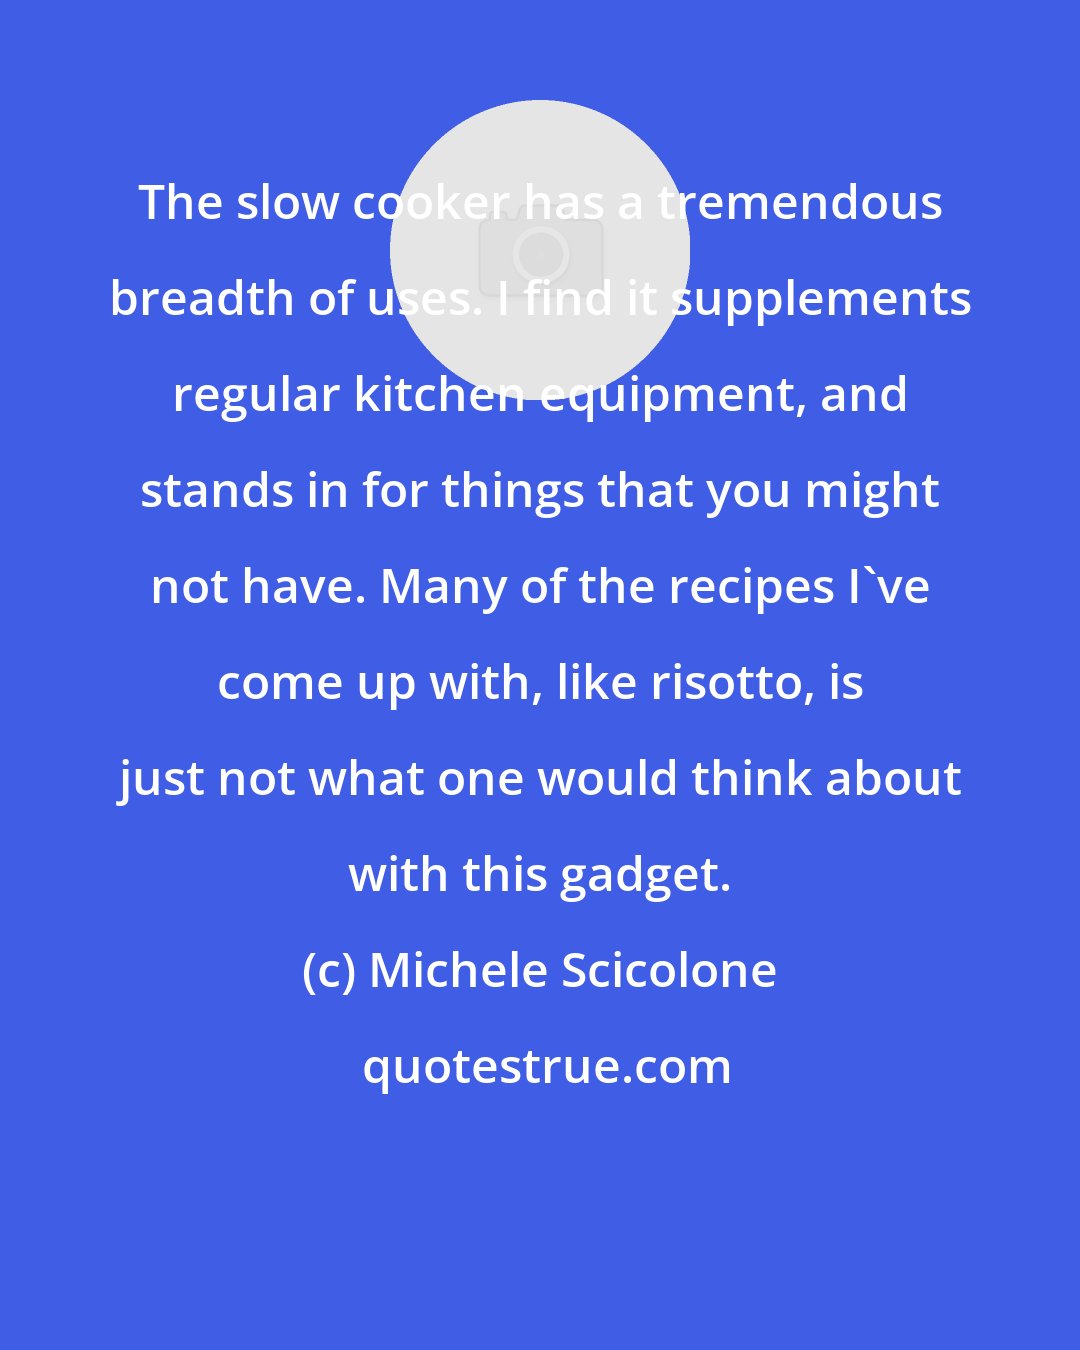 Michele Scicolone: The slow cooker has a tremendous breadth of uses. I find it supplements regular kitchen equipment, and stands in for things that you might not have. Many of the recipes I've come up with, like risotto, is just not what one would think about with this gadget.